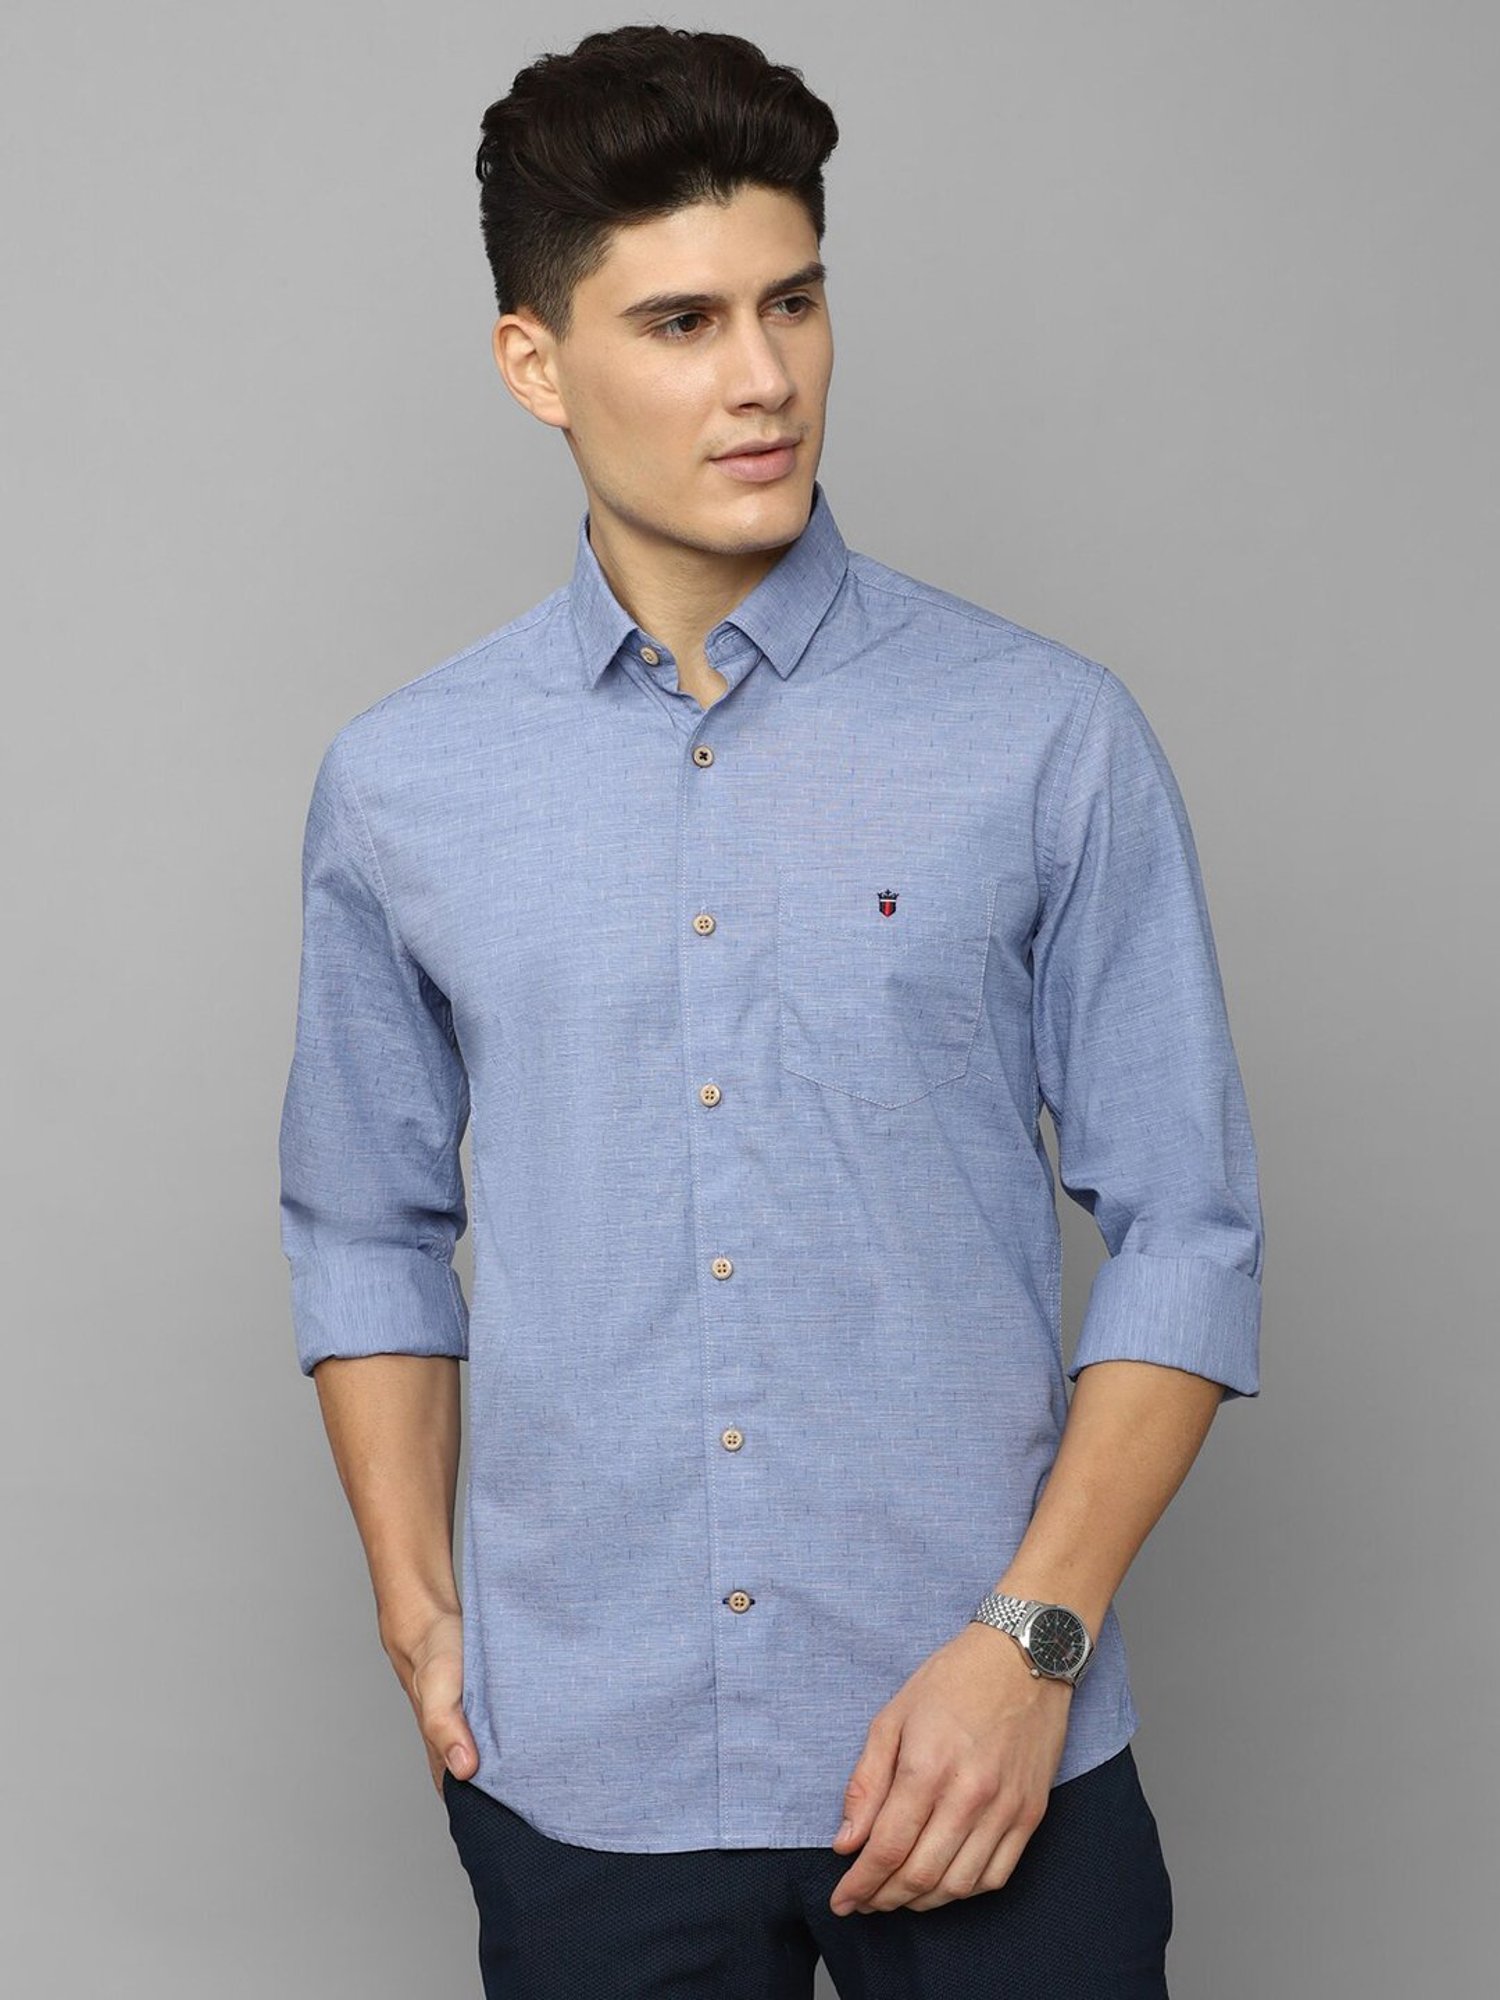 LOUIS PHILIPPE Men Printed Casual White Shirt - Buy LOUIS PHILIPPE Men  Printed Casual White Shirt Online at Best Prices in India | Flipkart.com